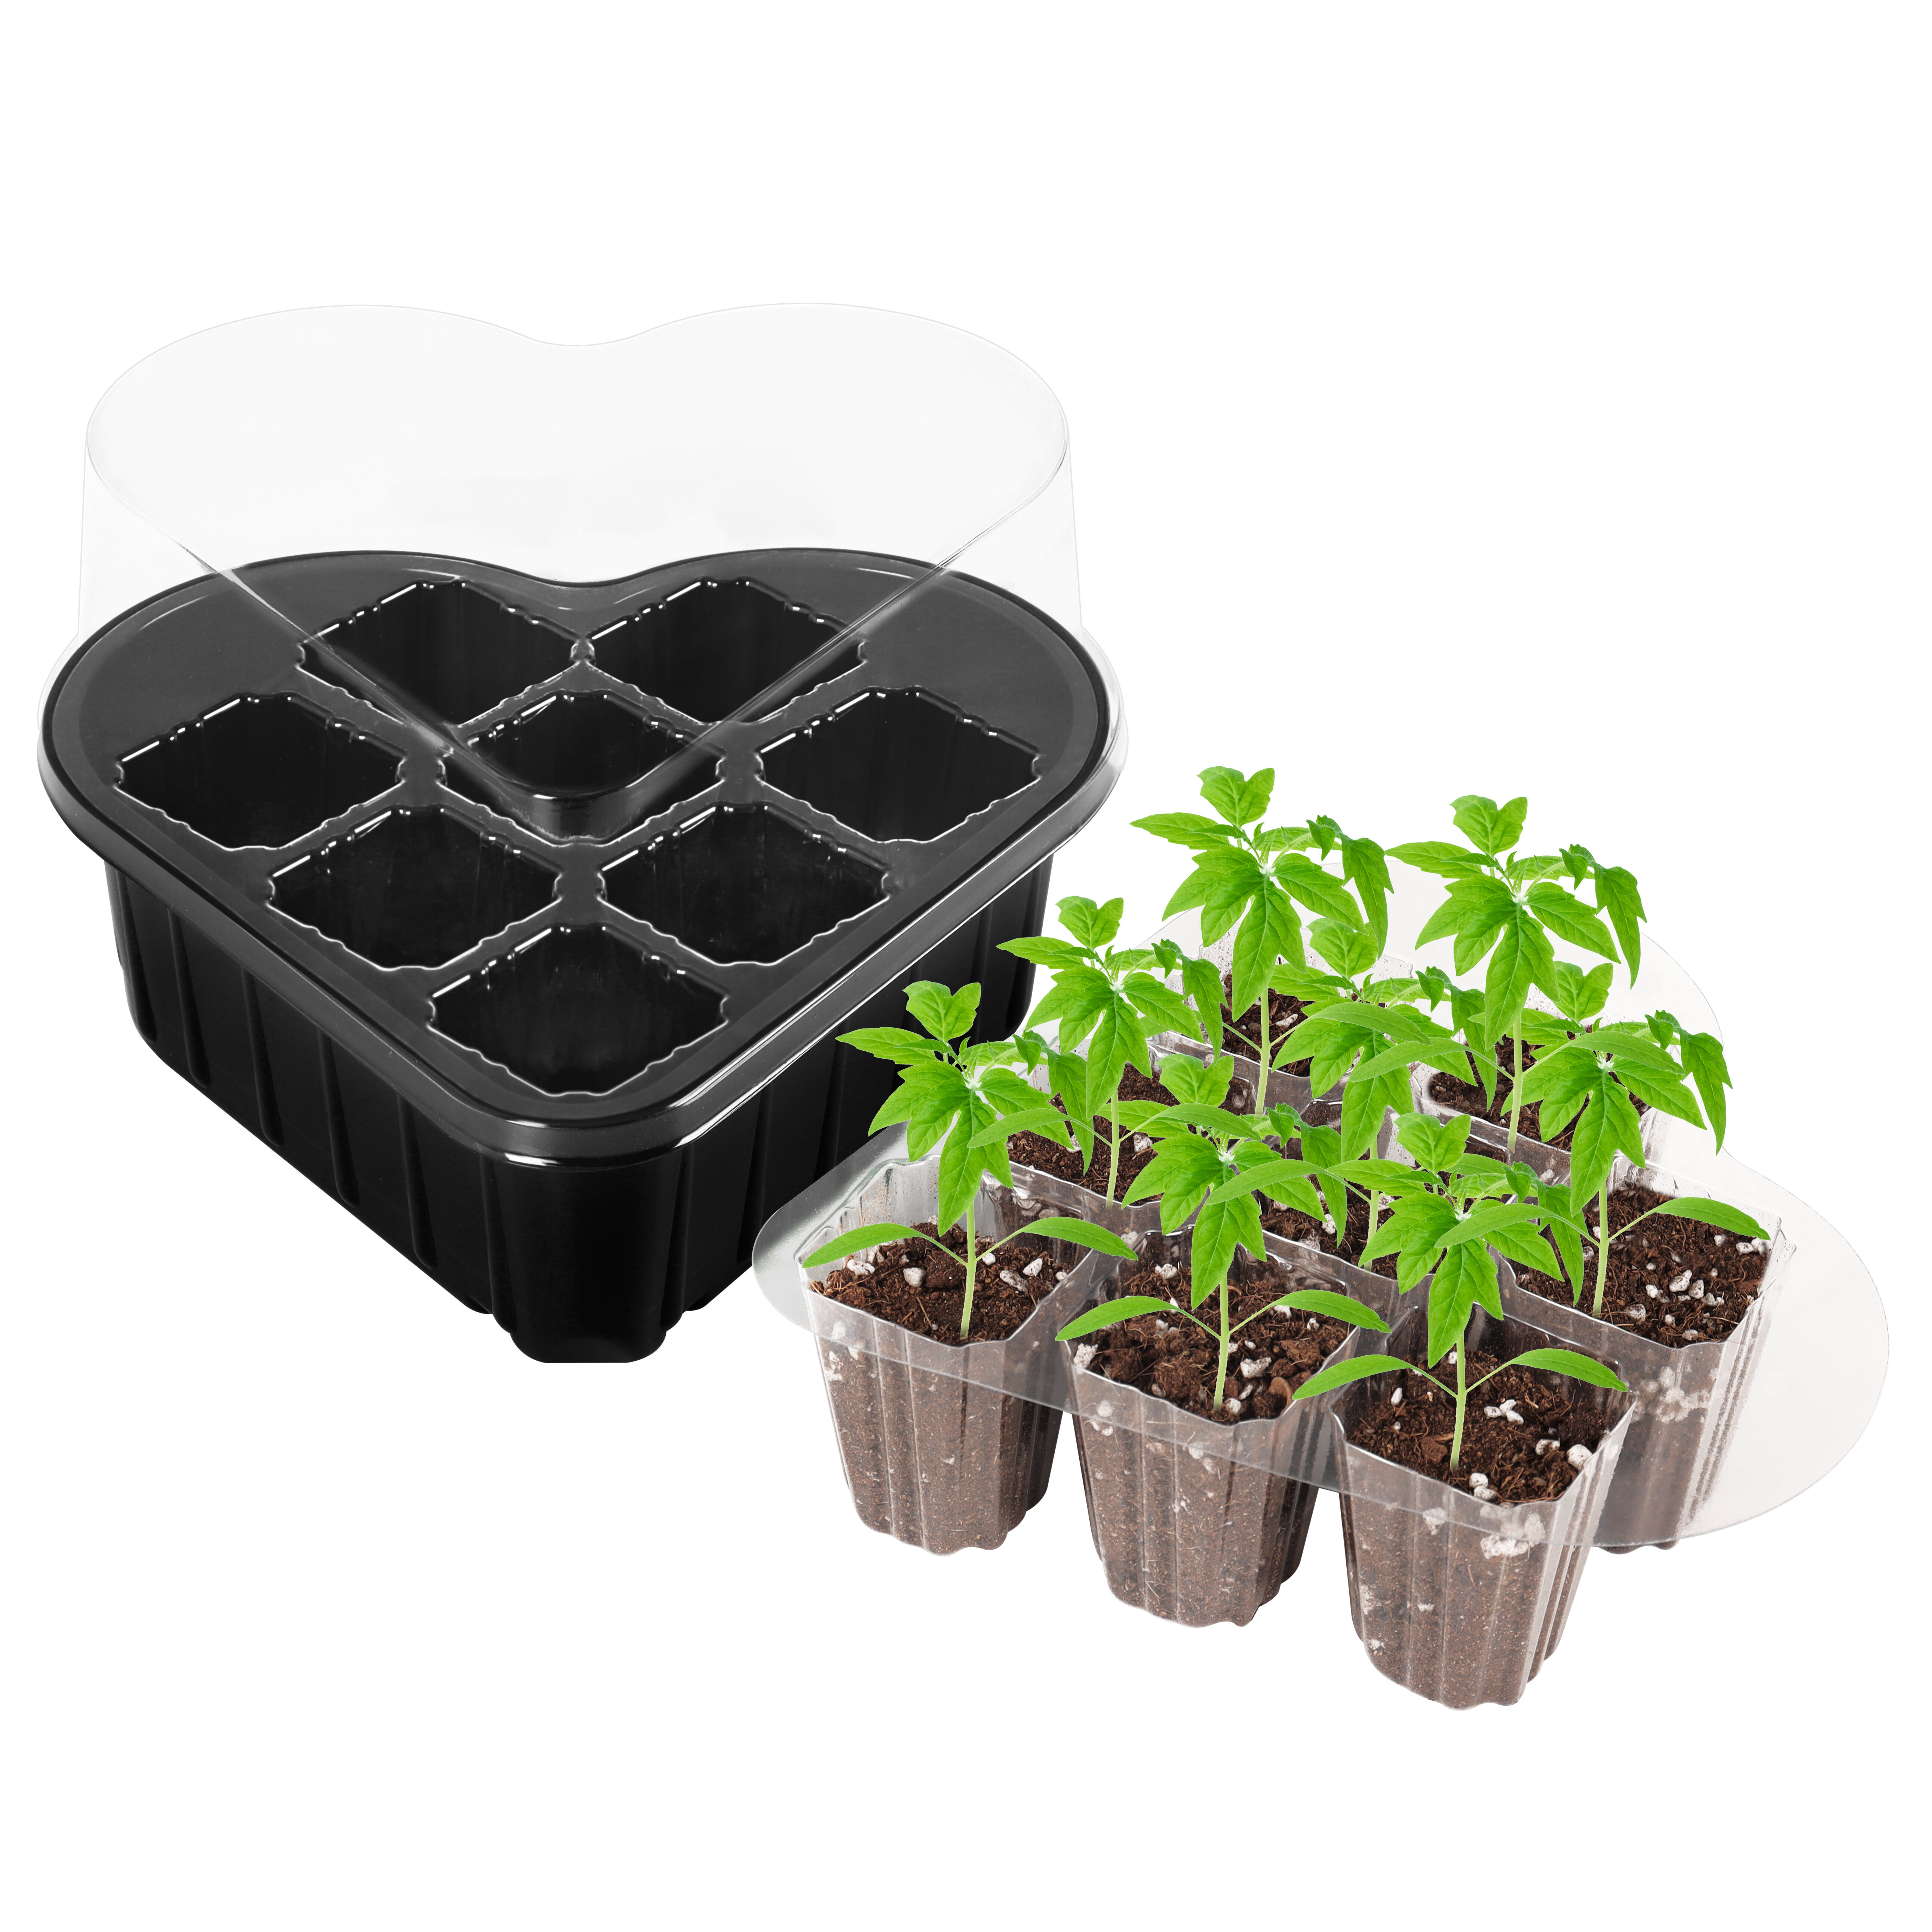 Silicone Seed Starting Tray,Reusable Seed Starting Trays for Seed Germination and Plant Propagation,Vegetable Seeds,Herb Seeds,Flower Plant Starter